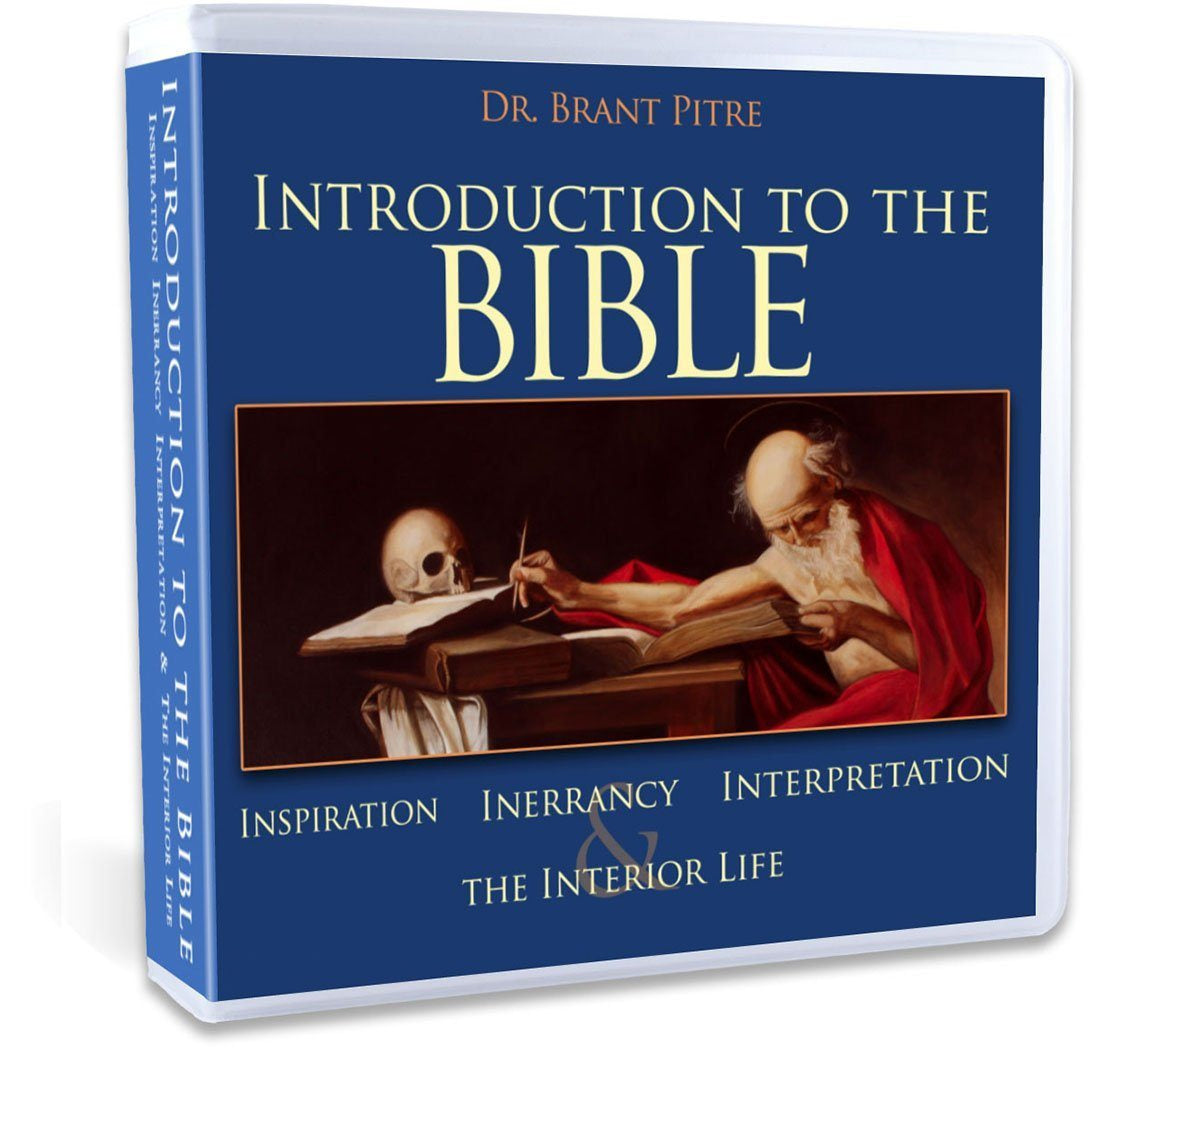 Dr. Brant Pitre will walk you through how Catholics understand and interpret sacred scripture in this Catholic Bible Study CD